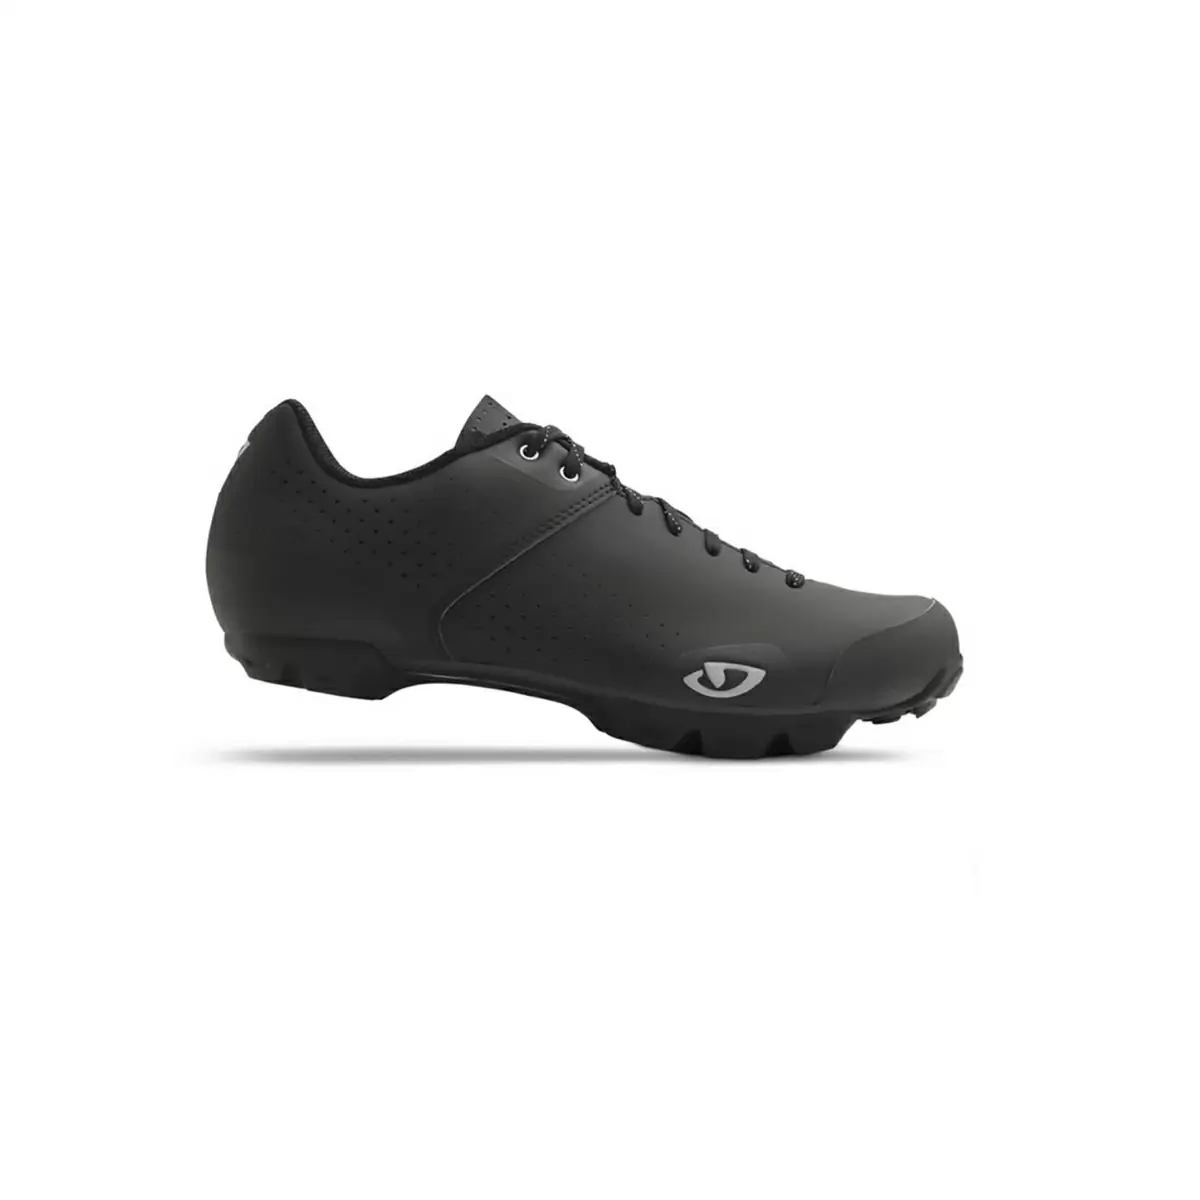 Chaussures VTT Privateer Lace Noir Taille 48 #1